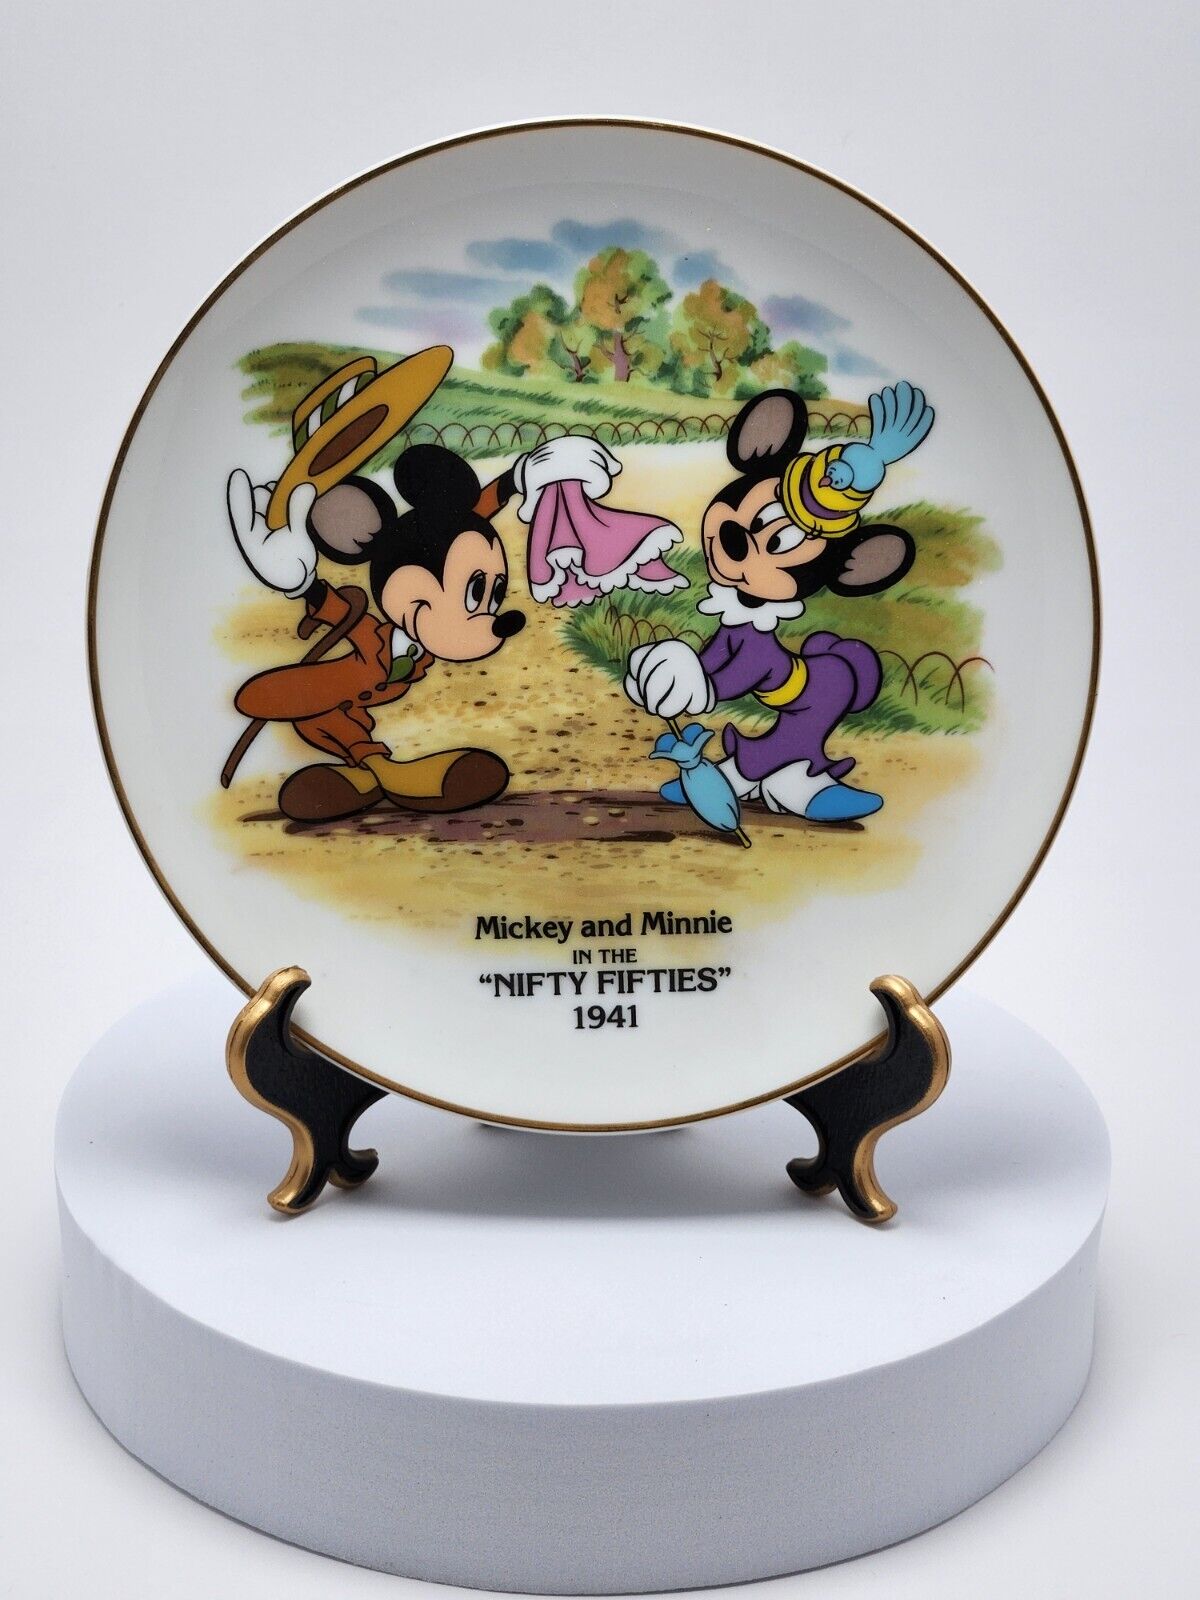 Vintage Disney Collector’s Plate Mickey & Minnie Mouse Nifty Fifties 1941